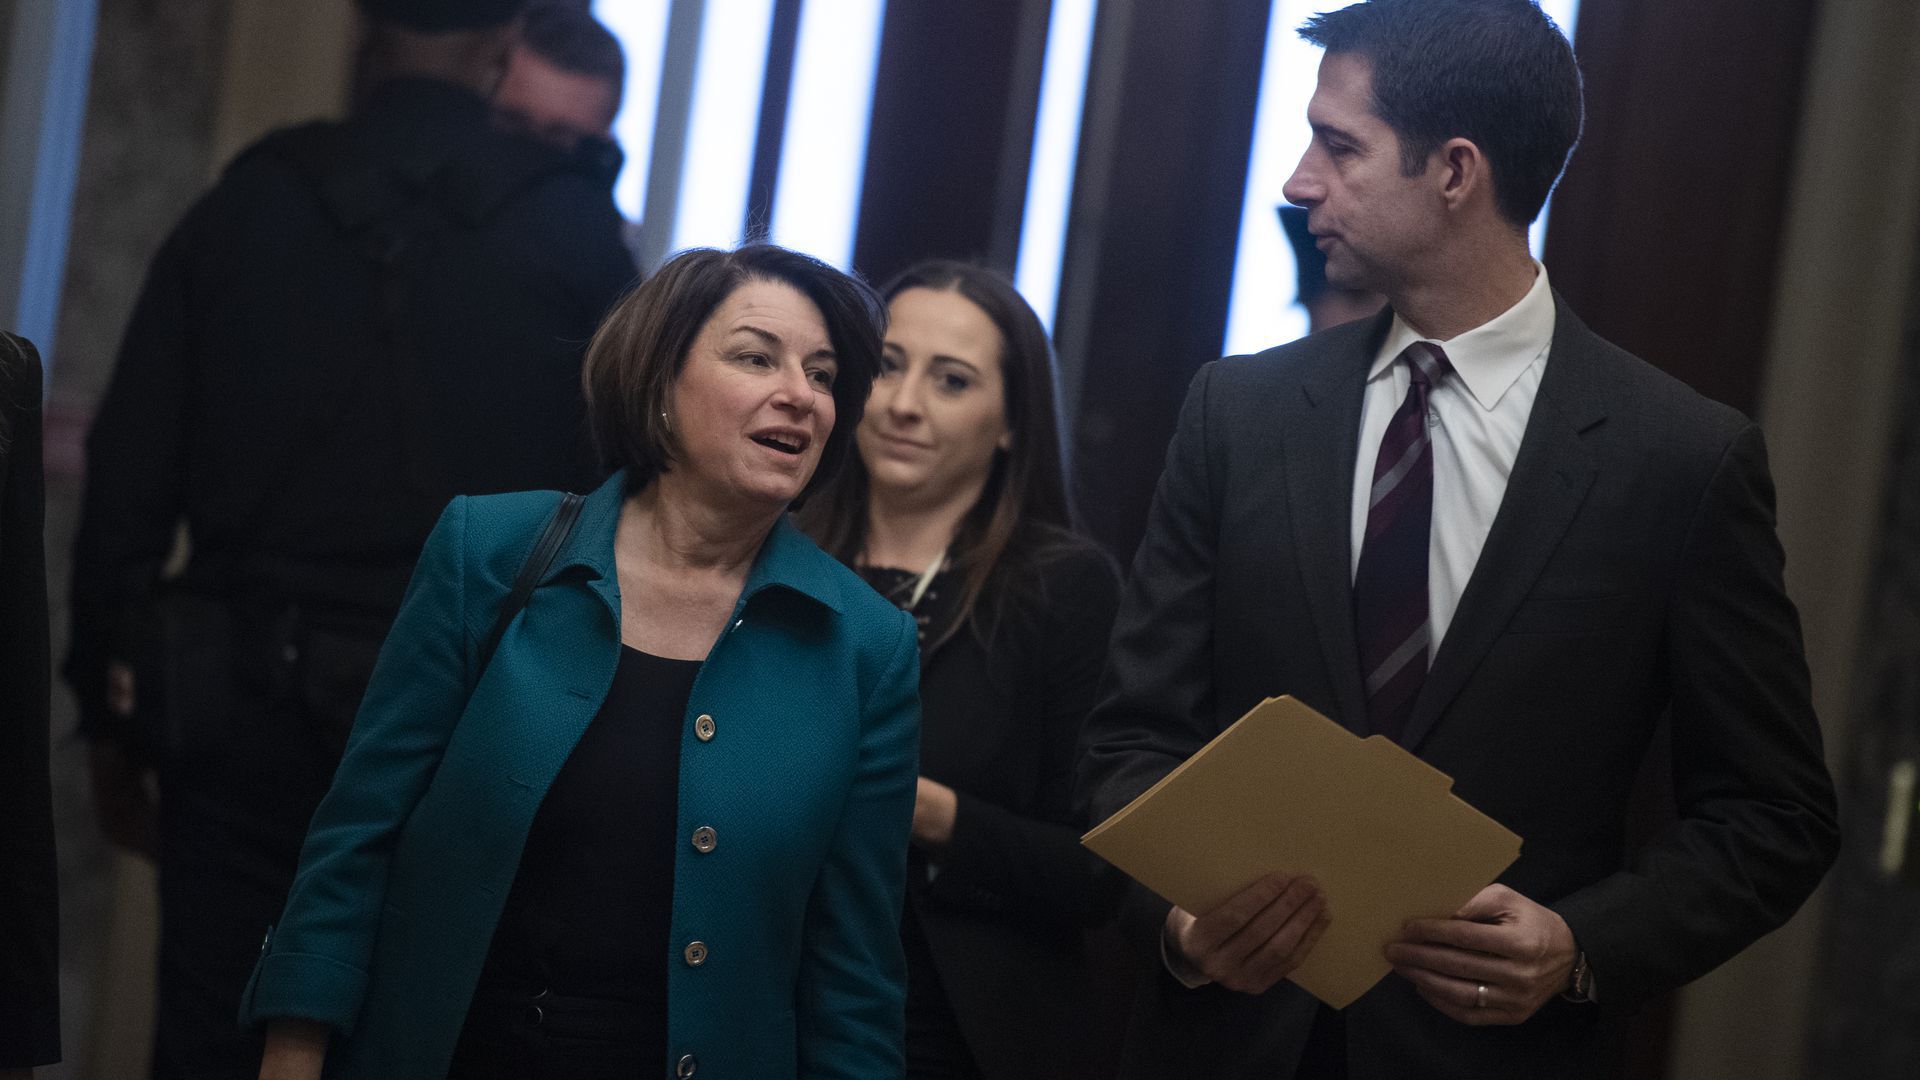 Sens. Amy Klobuchar and Tom Cotton arrive at the Capitol for the impeachment trial of President Trump on Jan. 21, 2020. Photo: Tom Williams/Getty Images